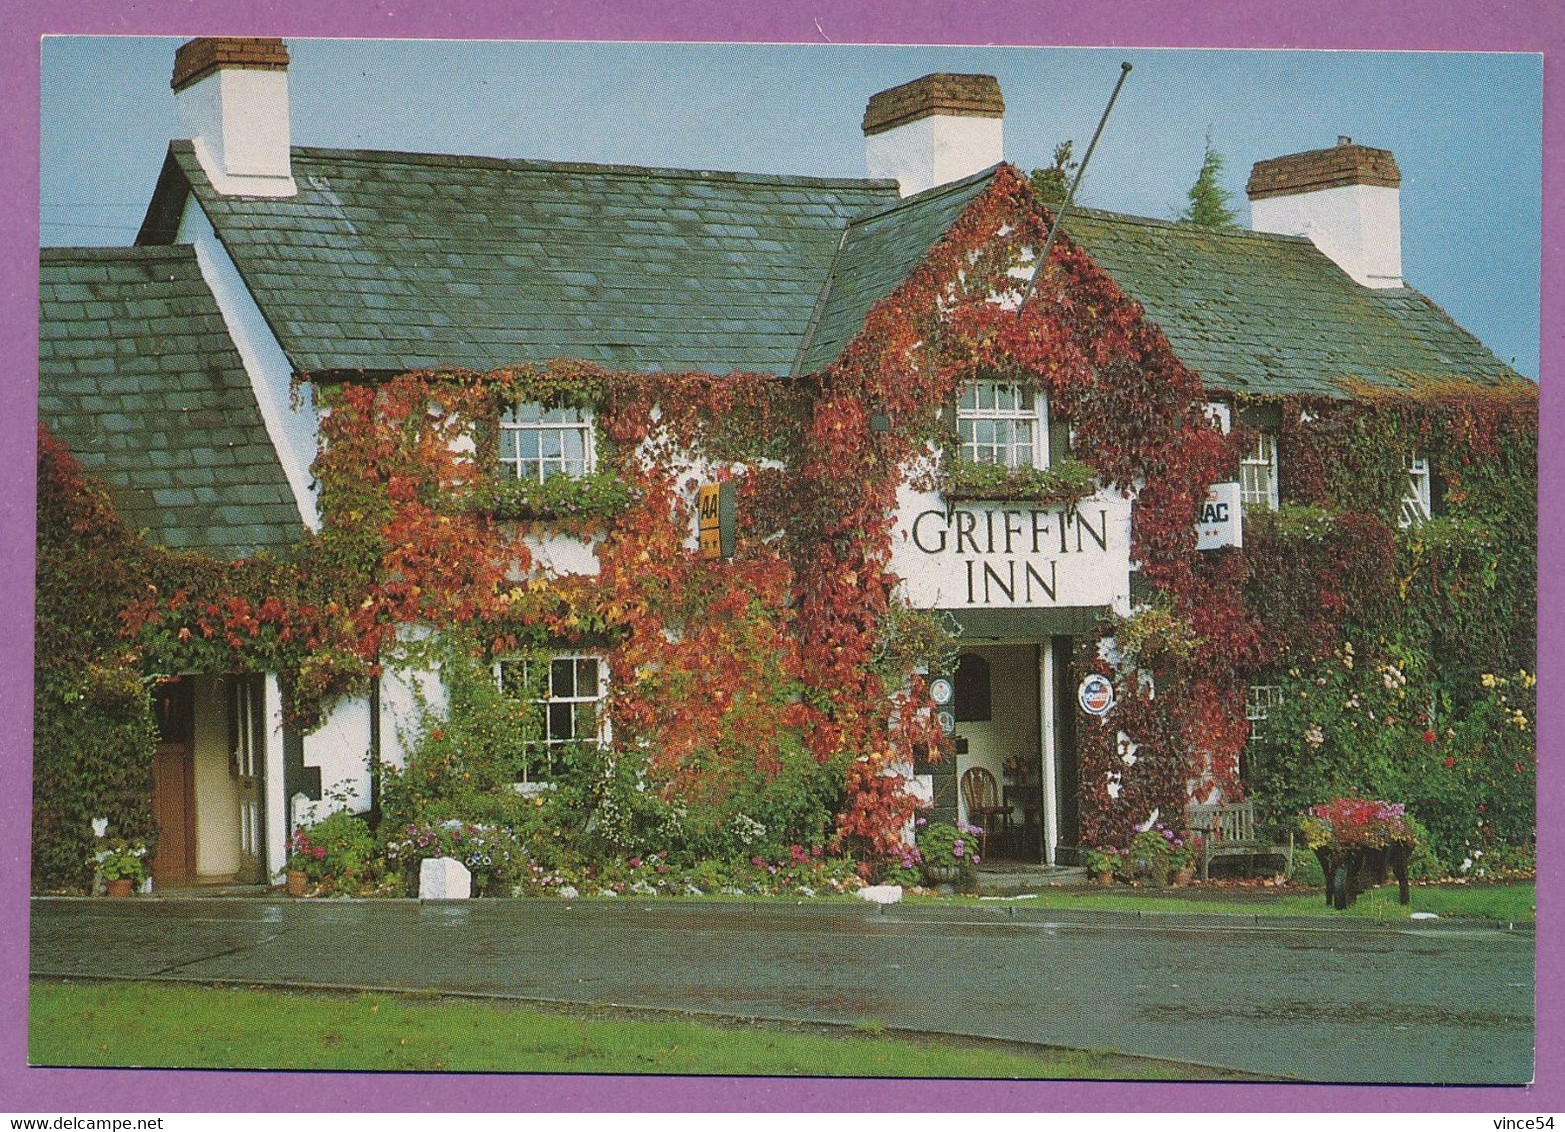 THE GRIFFIN INN - LLYSWEN - POWYS - Friendly And Famous Old Fishing Inn In Upper Wye Valley - Breconshire